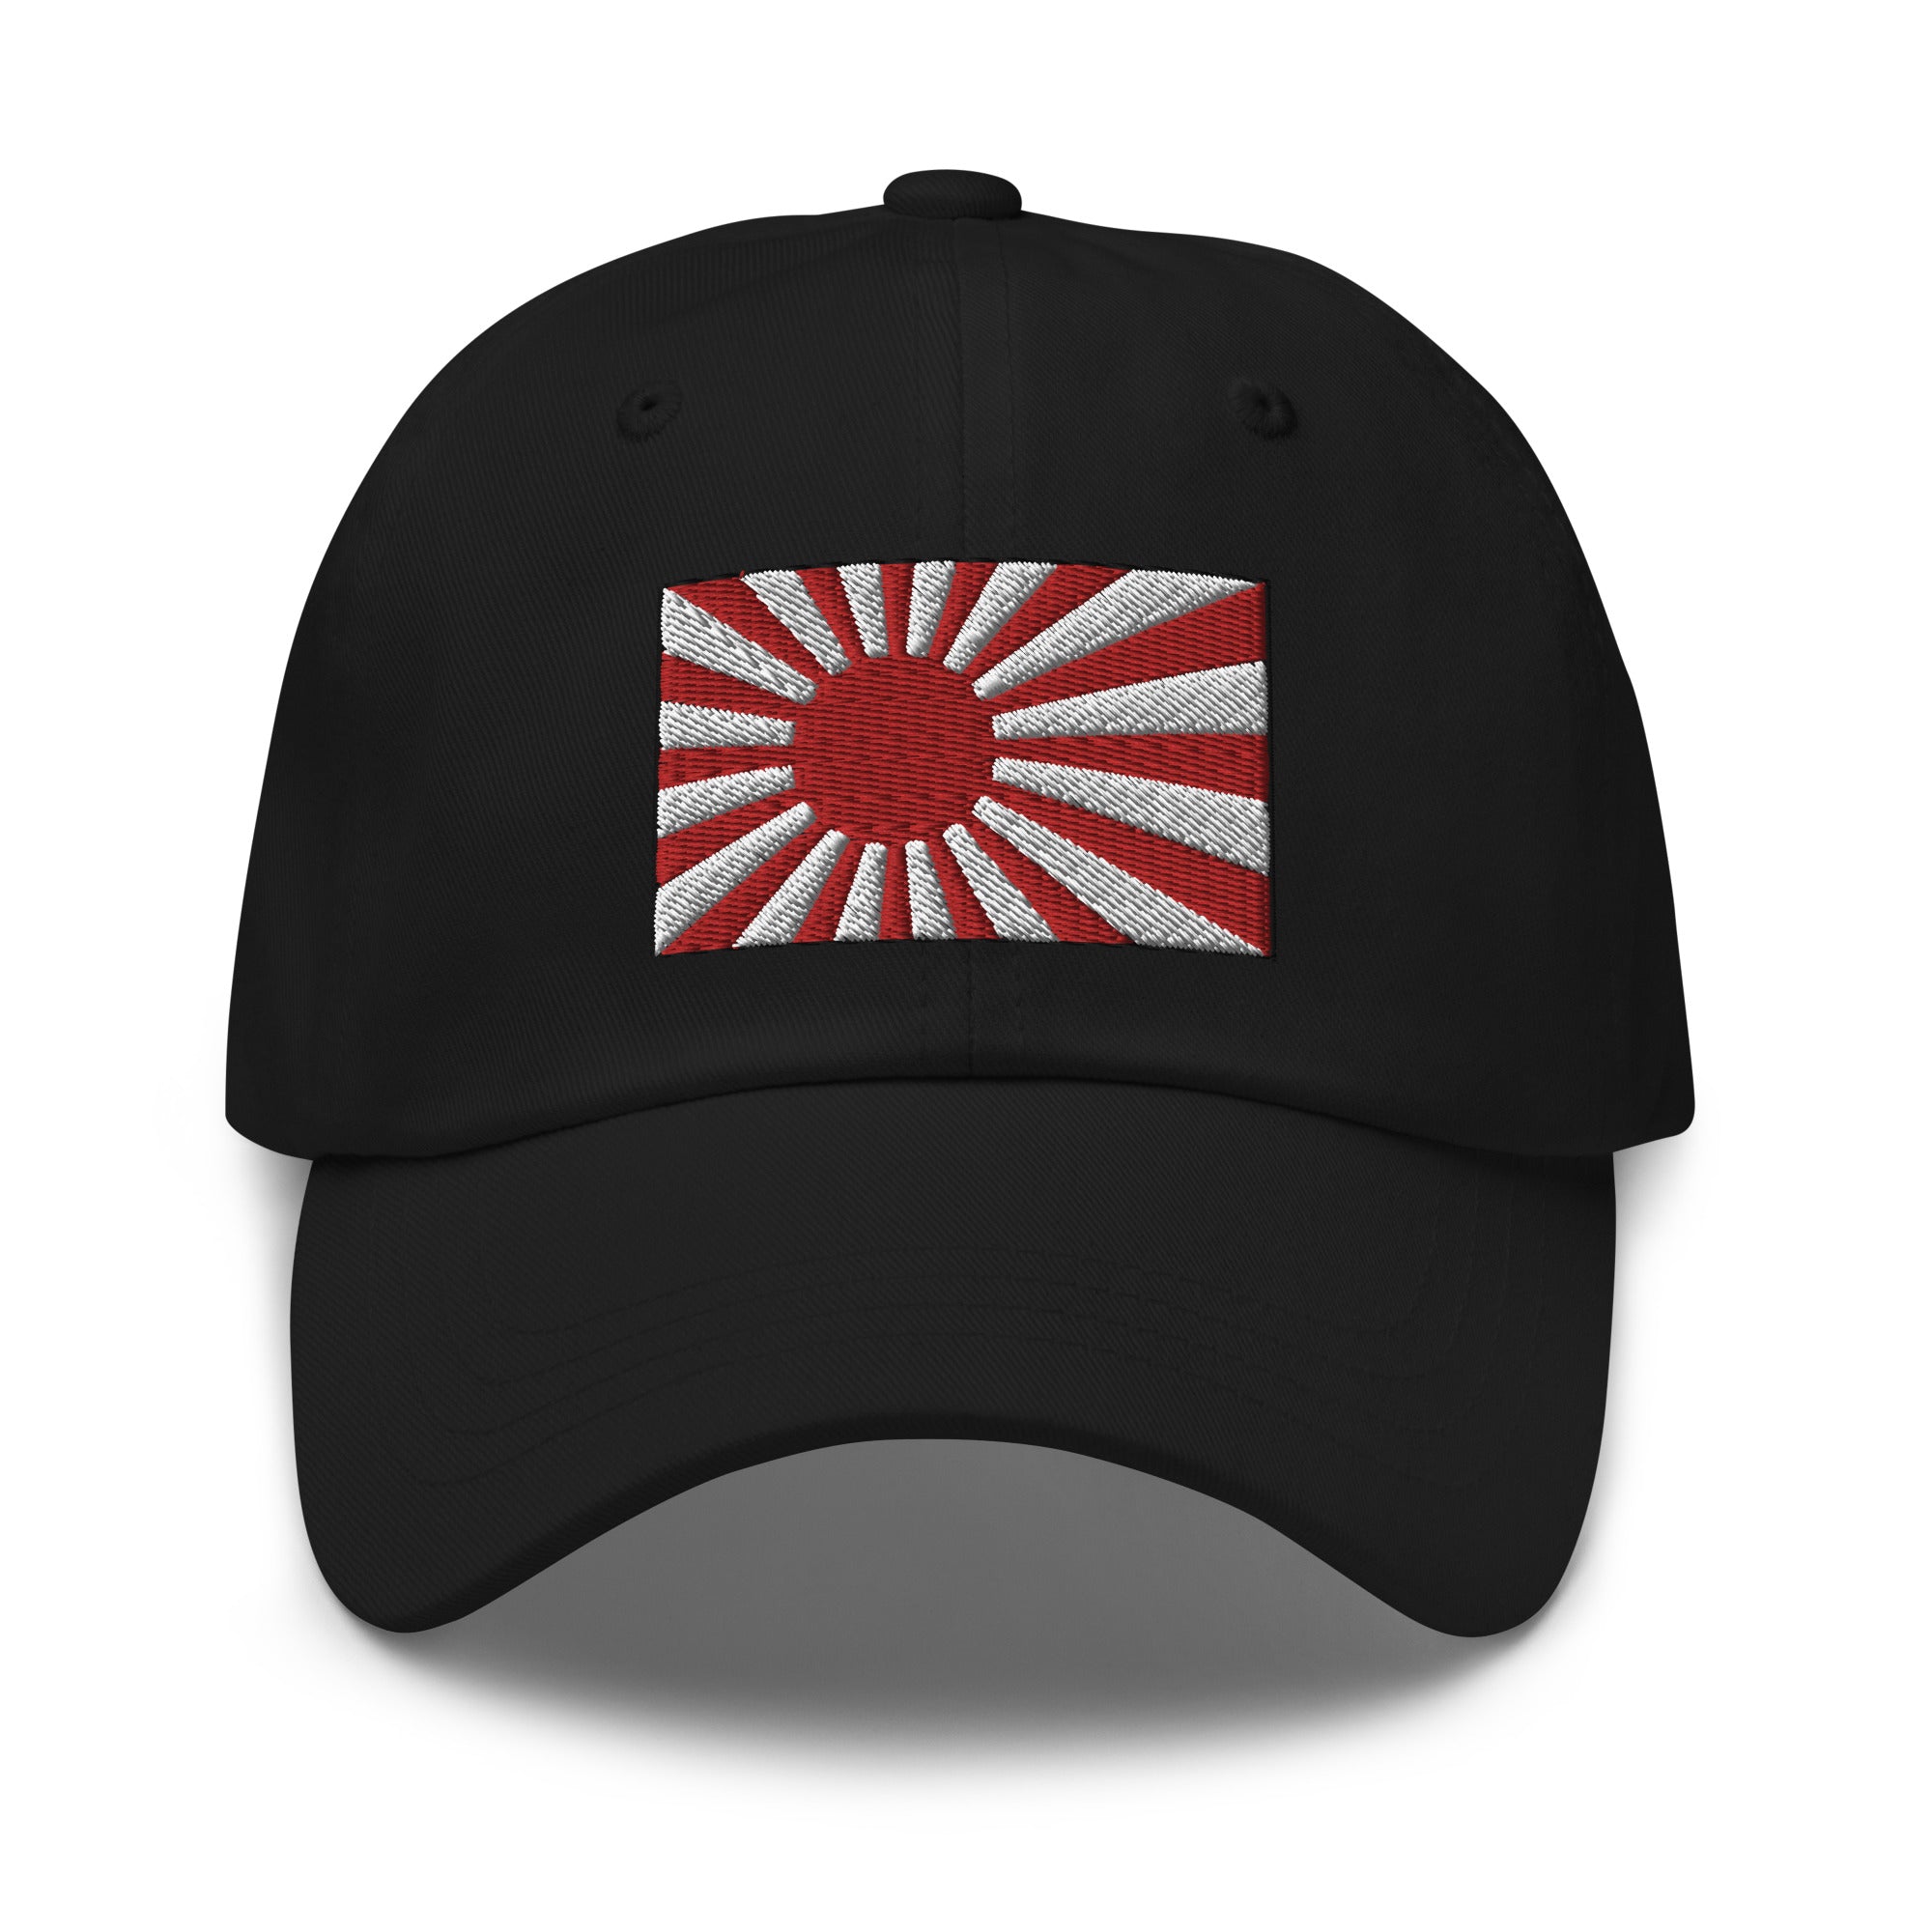 The National Flag of Japan Embroidered Baseball Cap Land of the Rising Sun Dad hat - Edge of Life Designs